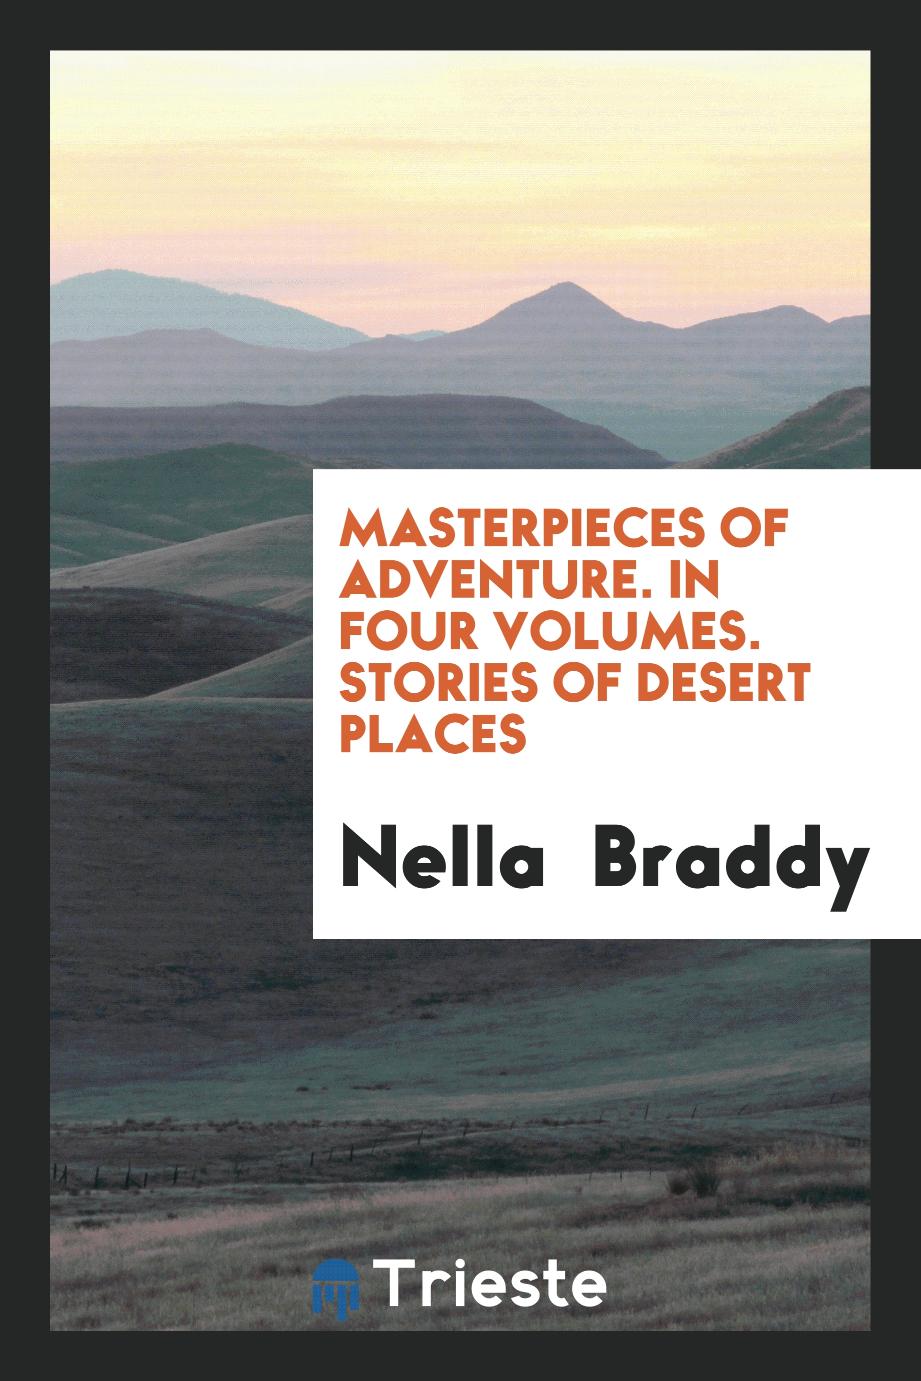 Masterpieces of adventure. In four volumes. Stories of Desert places